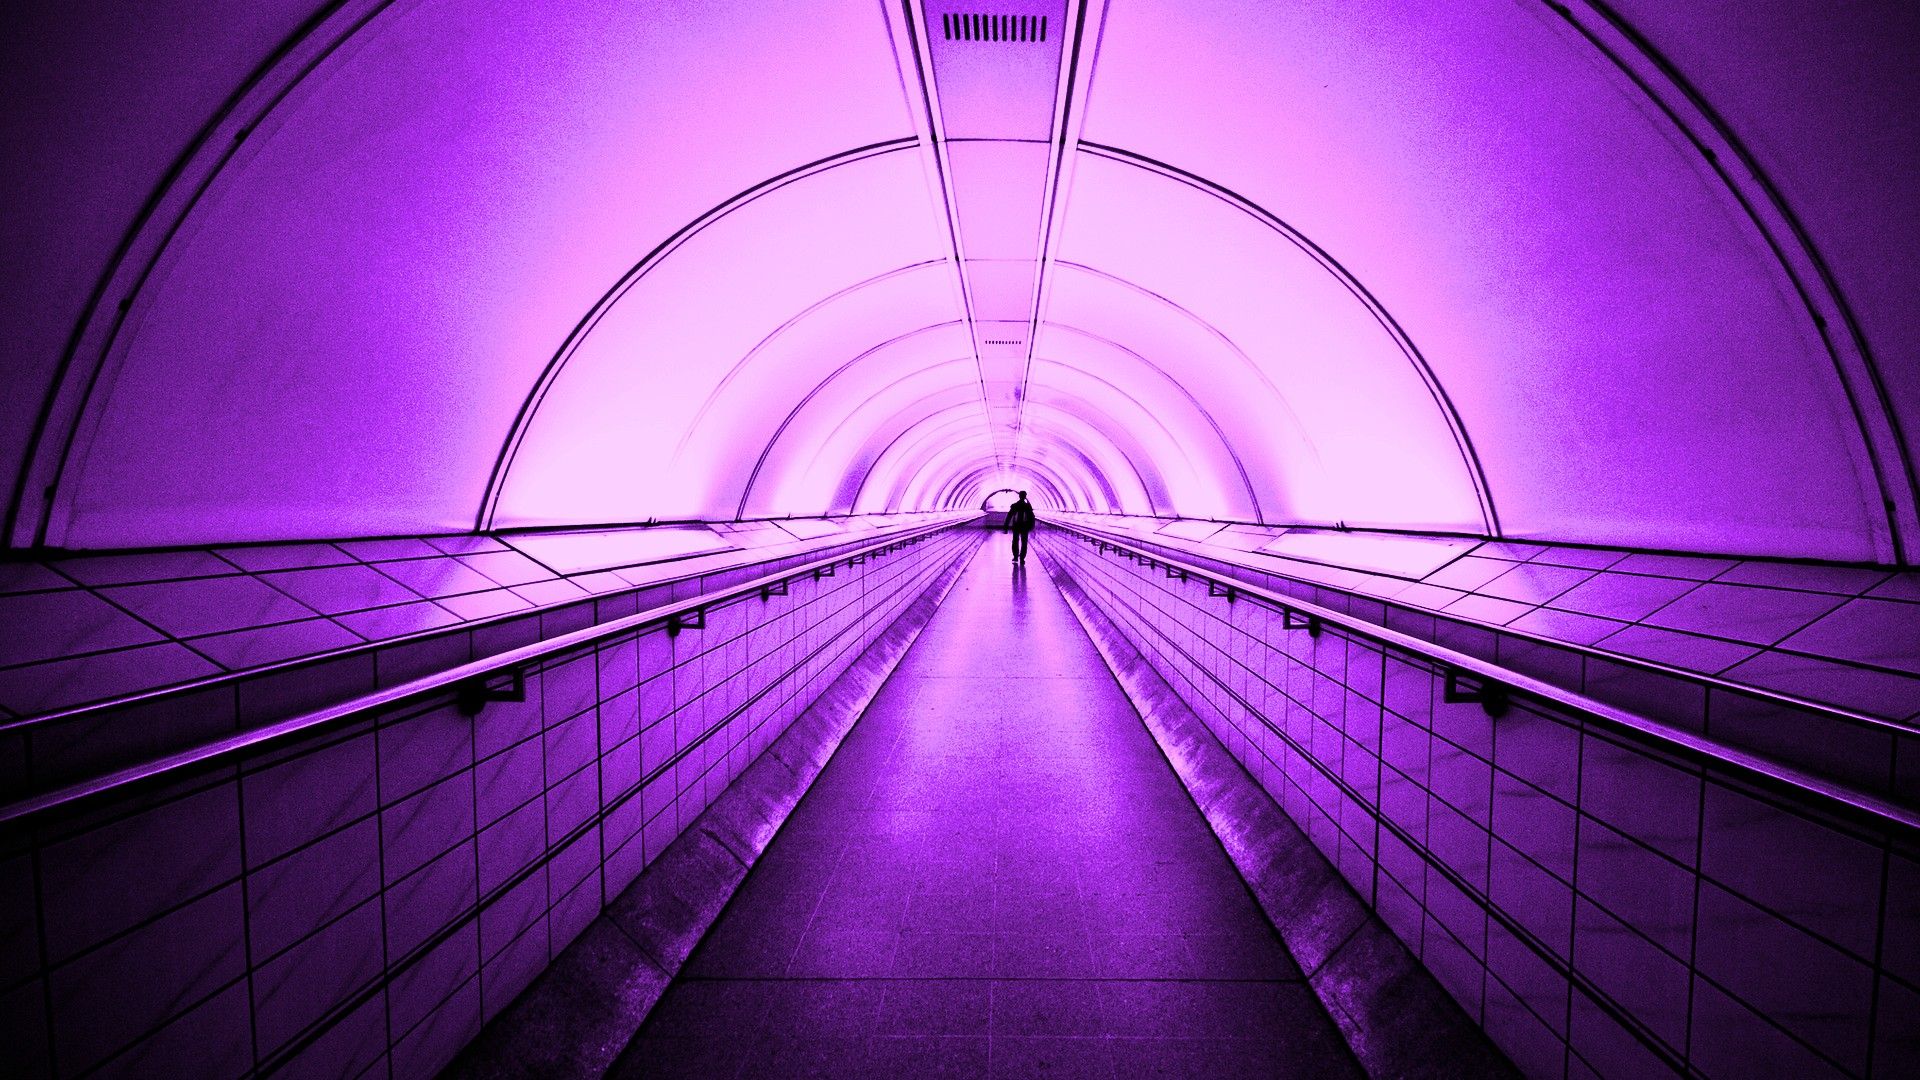 20 Outstanding Purple Computer Wallpaper Aesthetic You Can Use It For